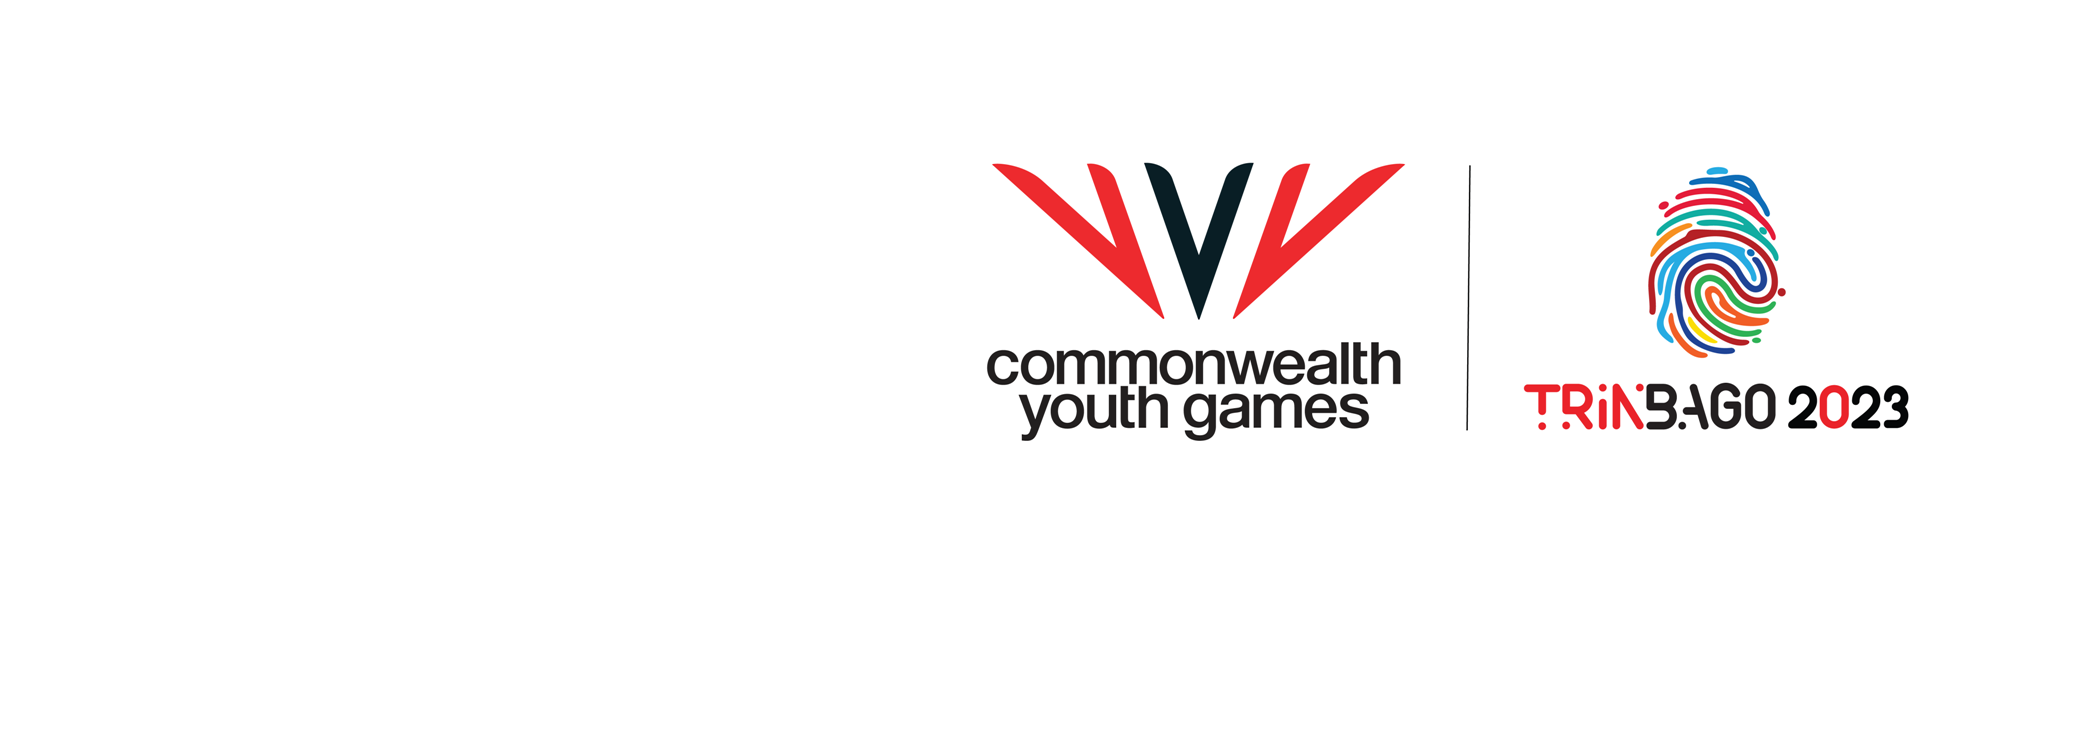 Triathlon Canada Releases 2023 Commonwealth Youth Games Selection